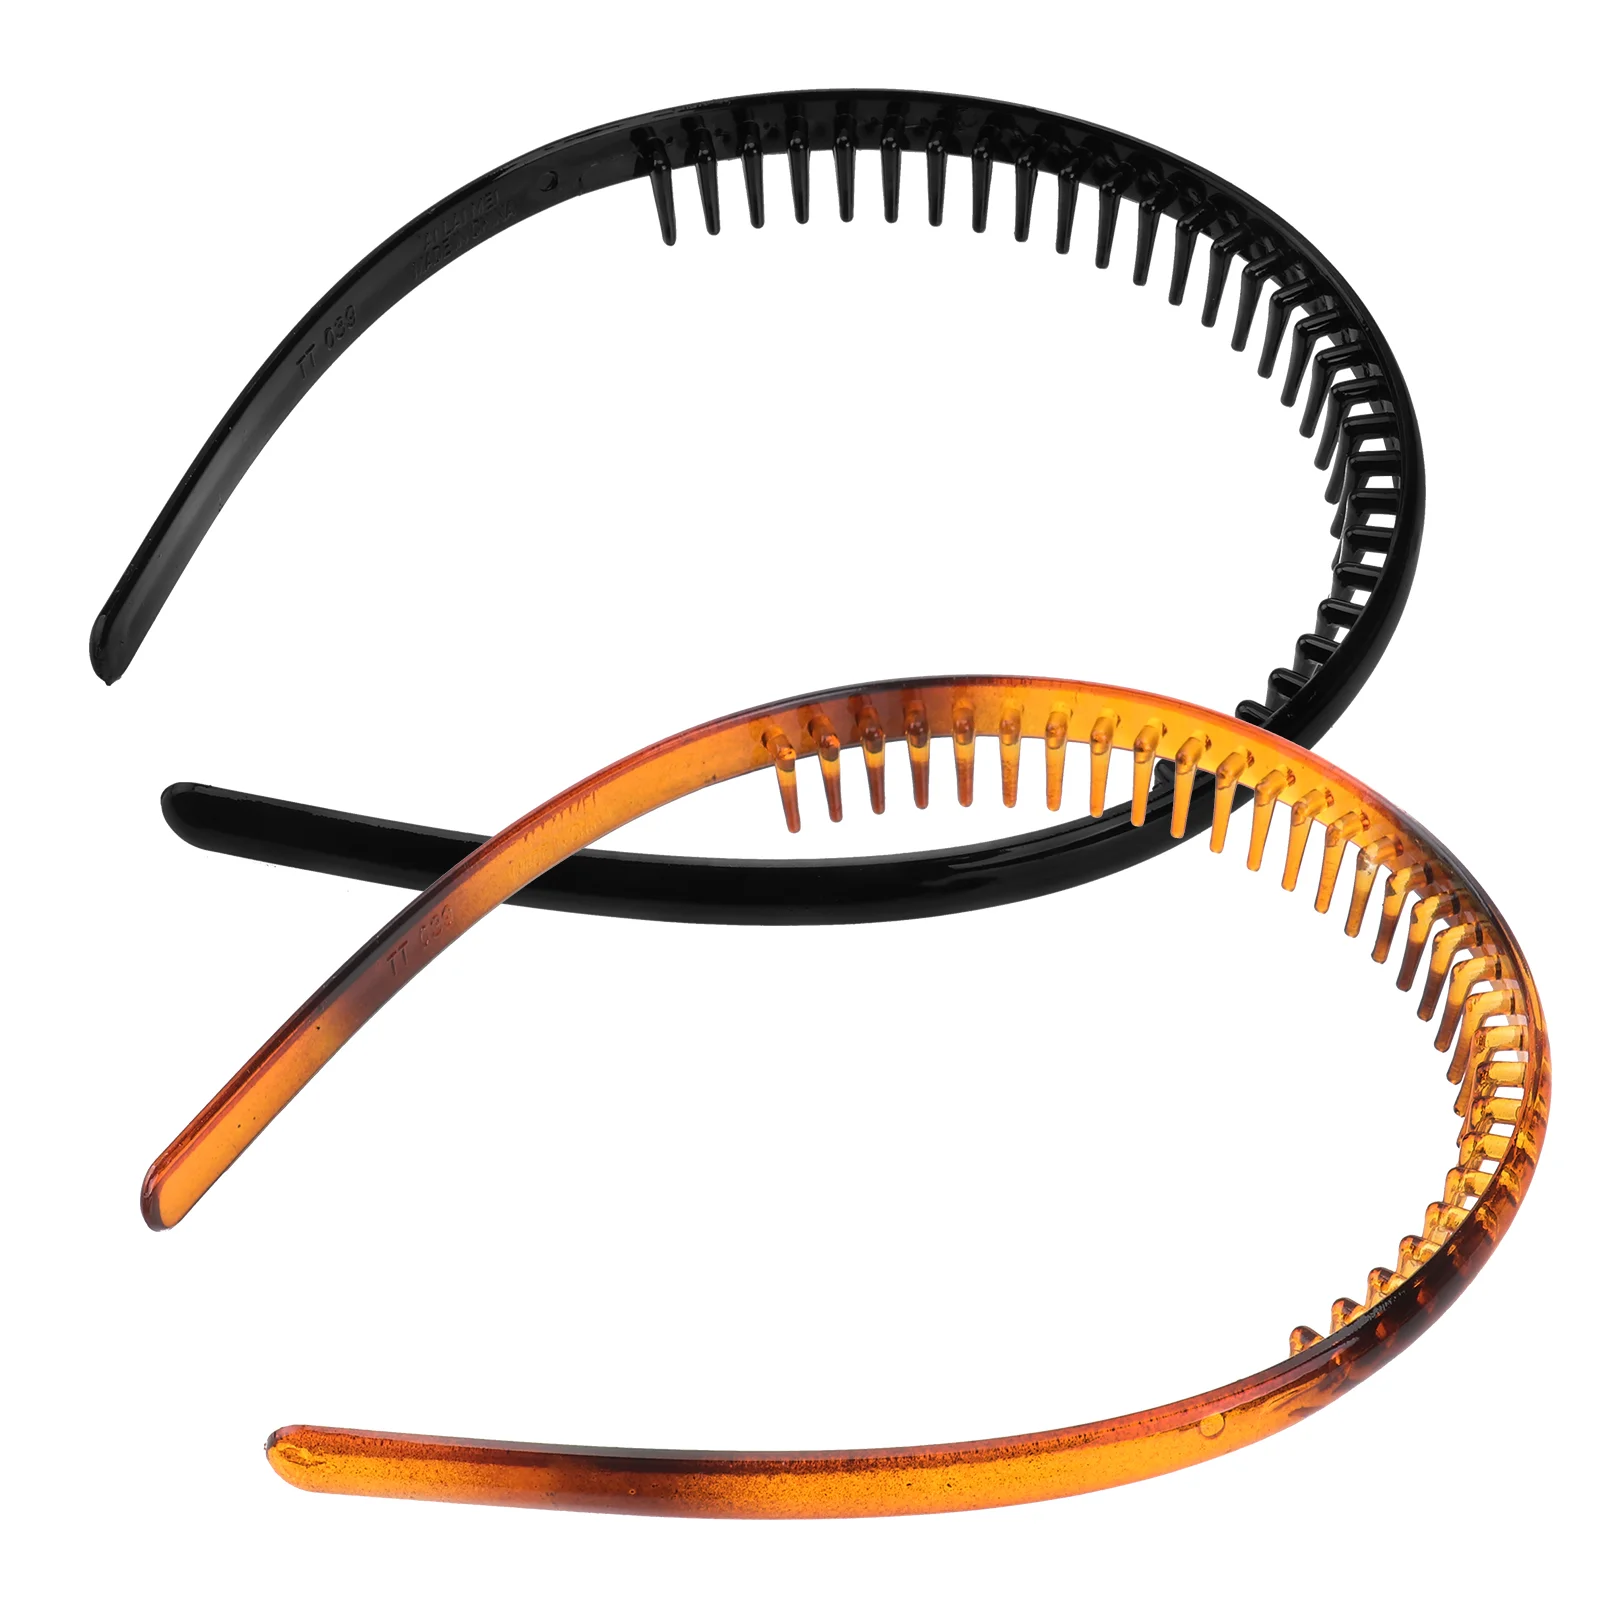 

2Pcs Comb Headbands Non- Comb Hairbands Resin Comb Hair Simple Hair Styling Accessories for